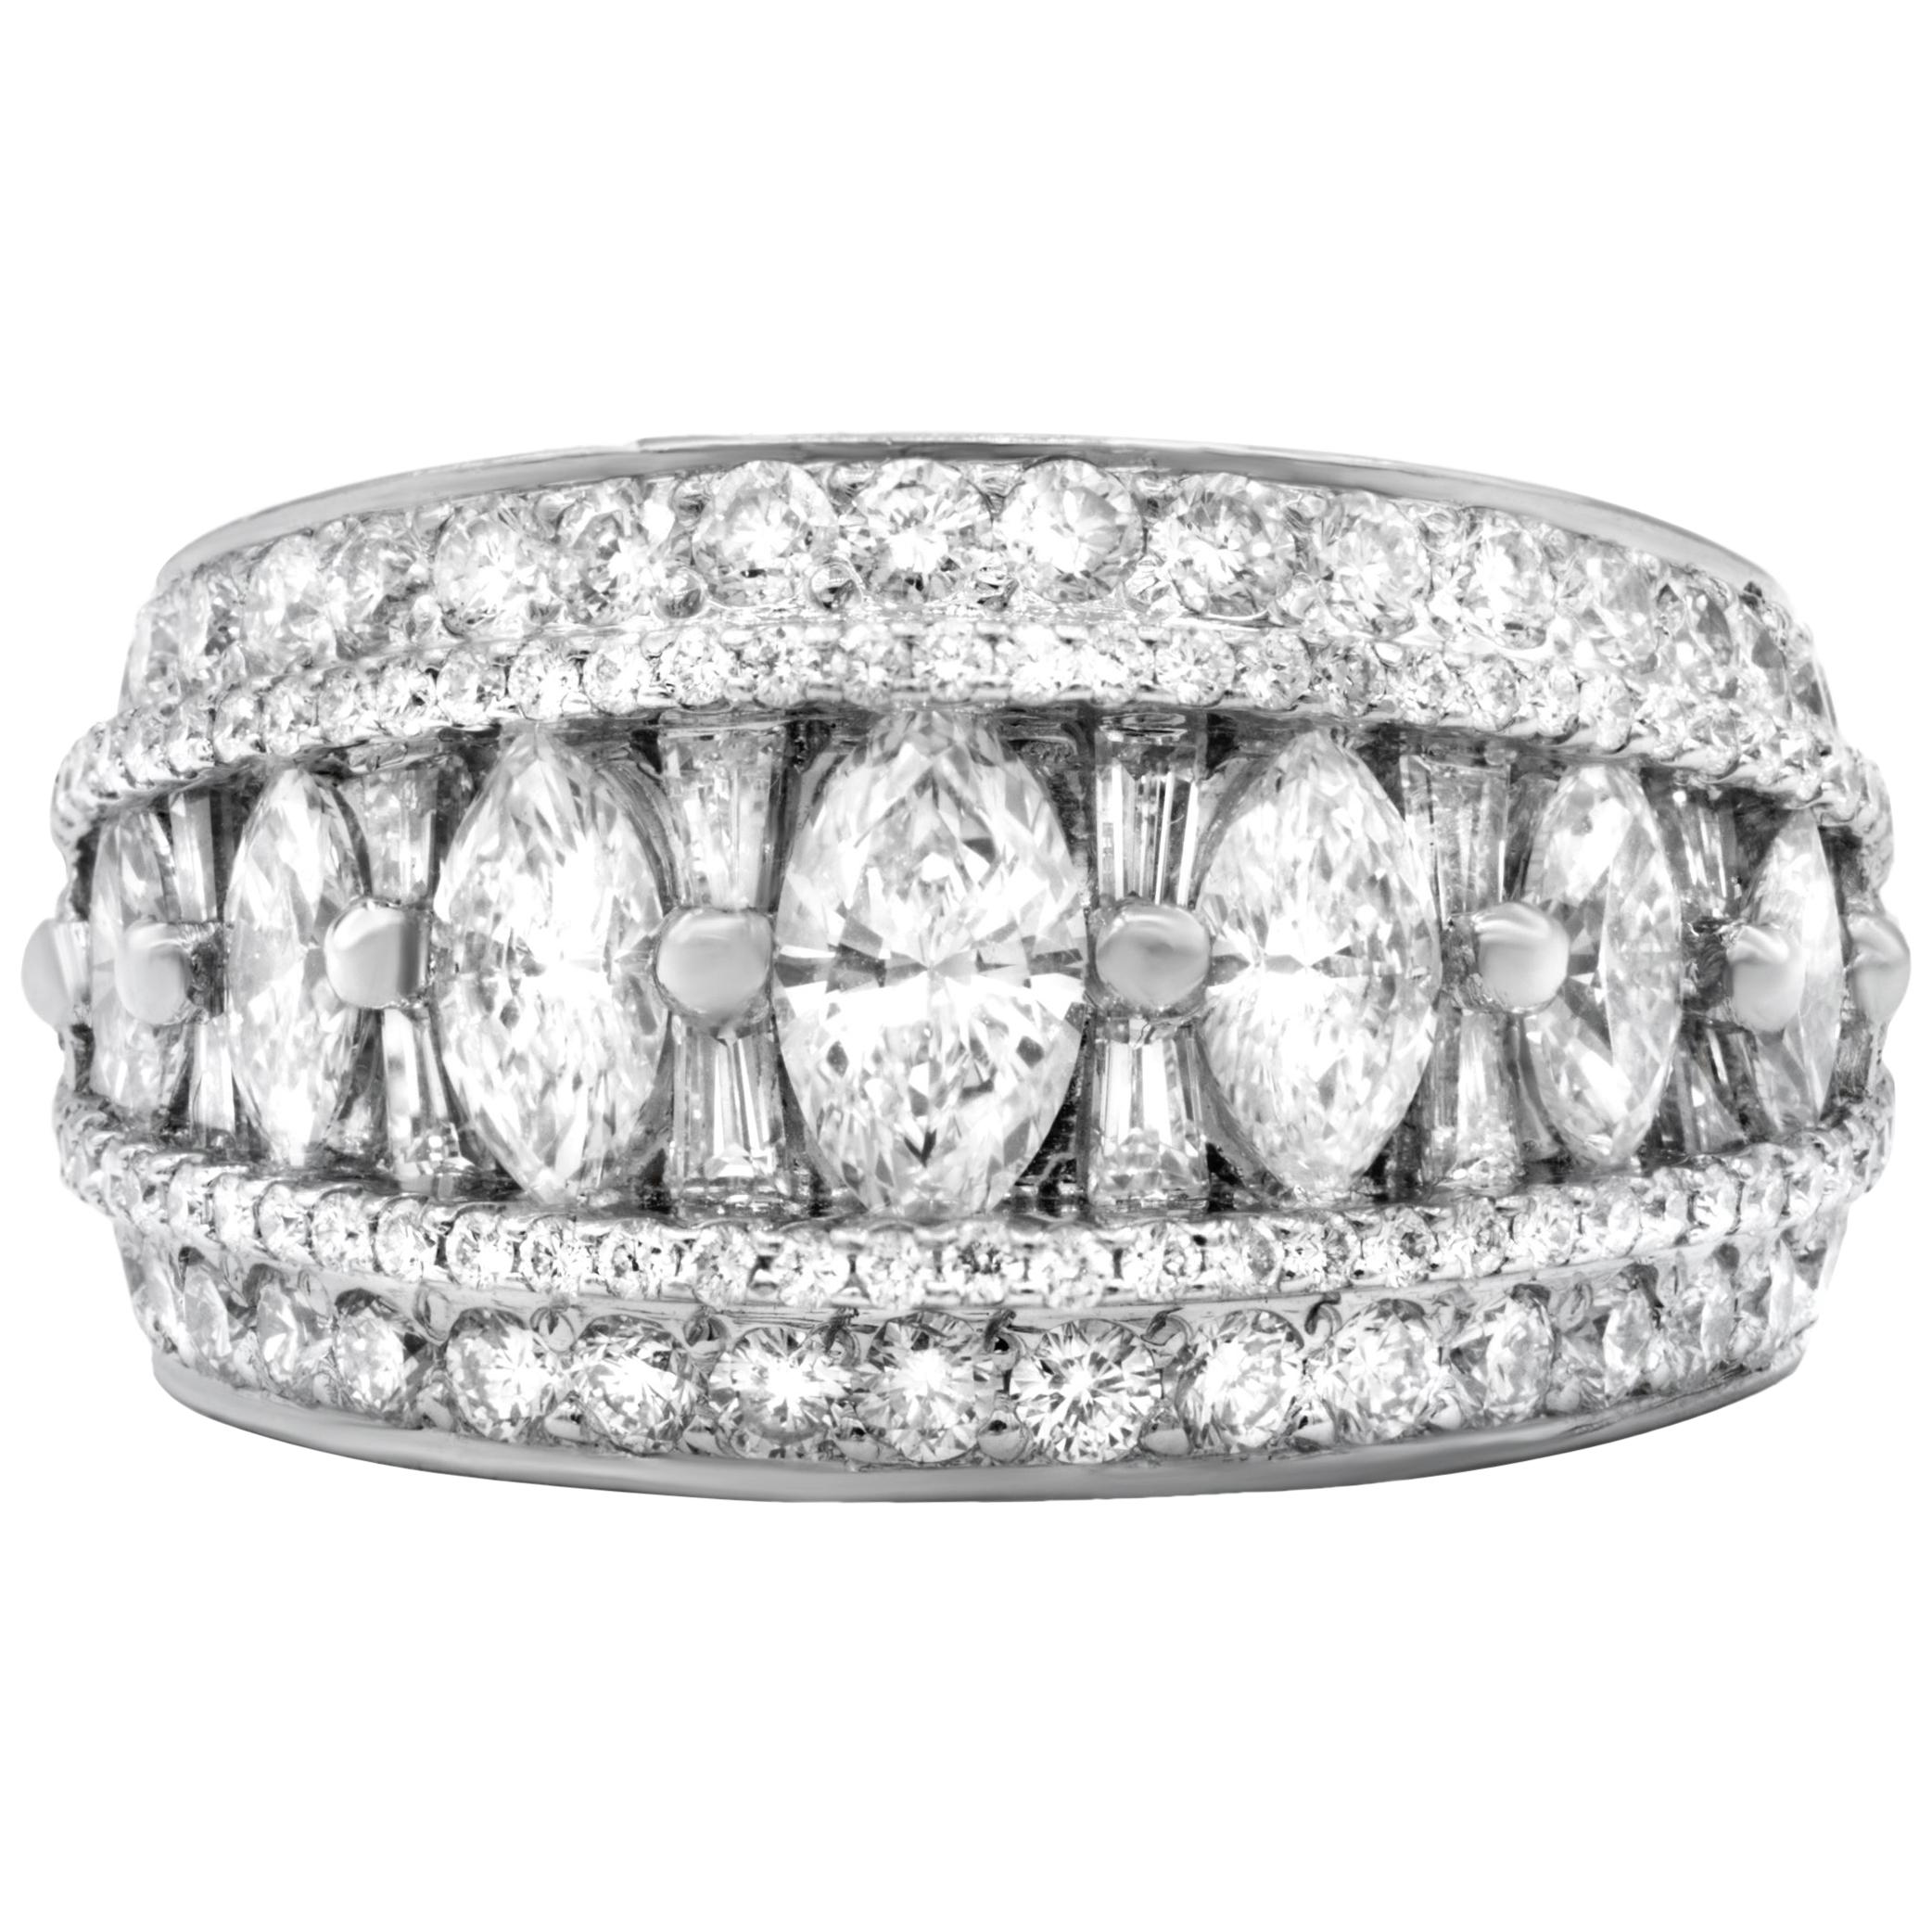 Platinum Diamond Ring with Marquise, Baguette and Round Diamonds